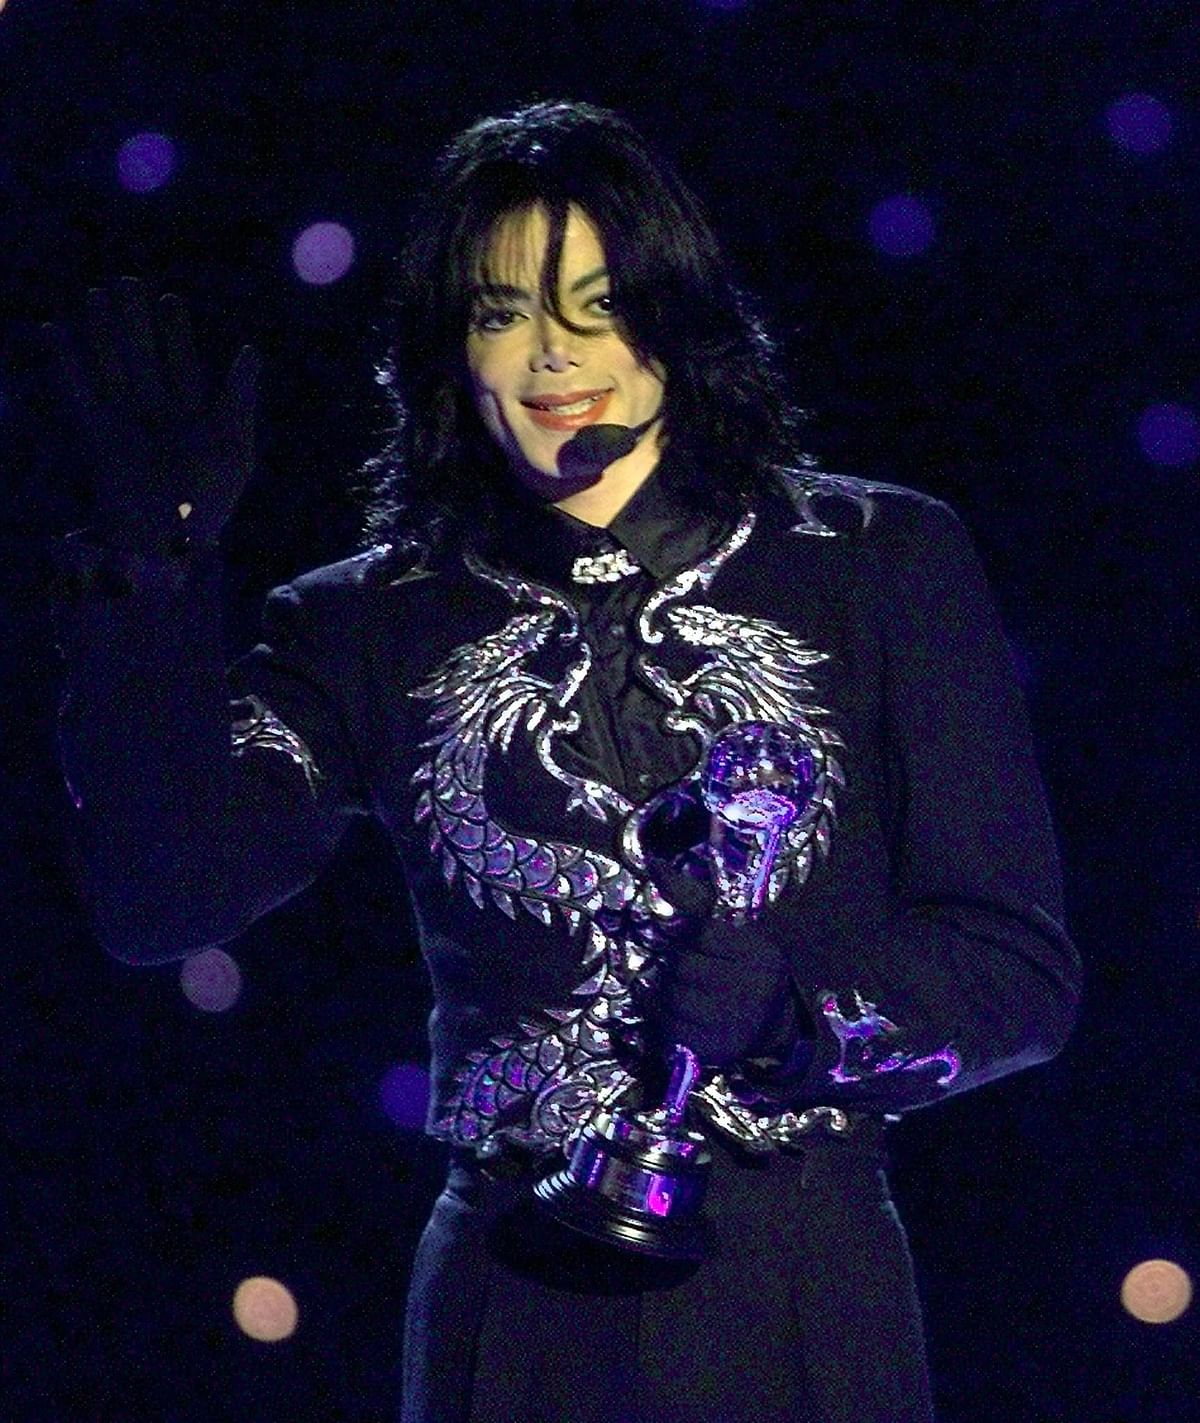 This file photo taken on 11 May, 2000 shows Michael Jackson sings during the World Music awards ceremony in Monaco. Photo: AFP